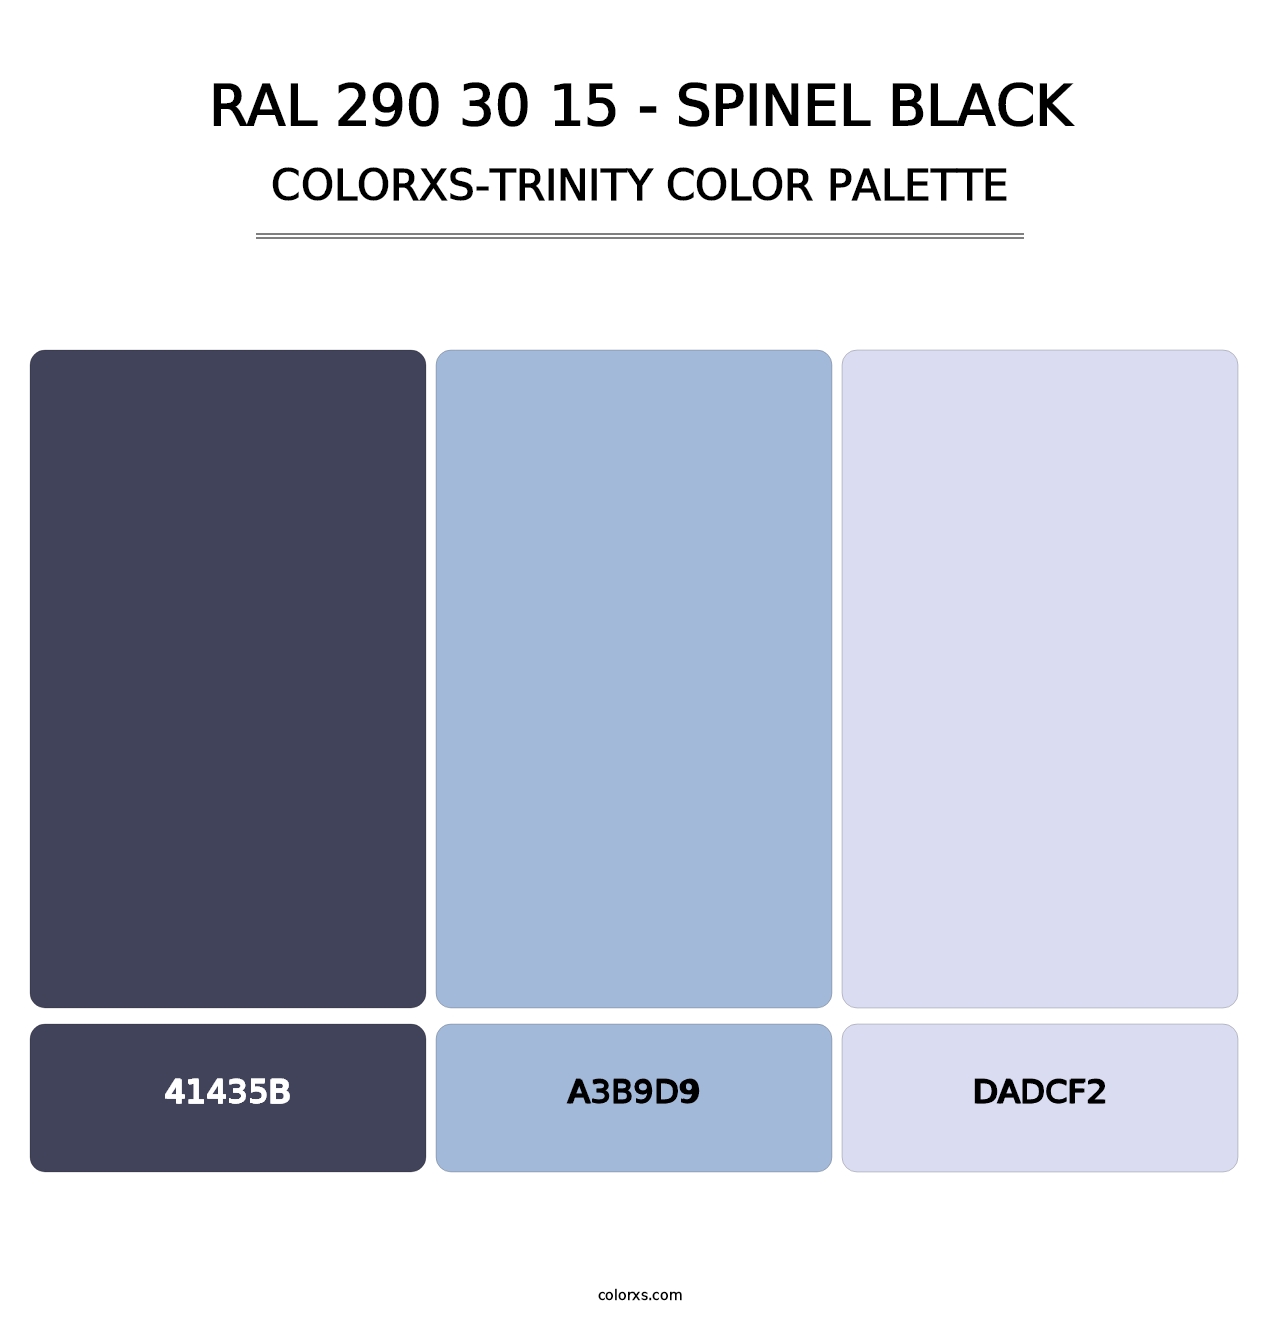 RAL 290 30 15 - Spinel Black - Colorxs Trinity Palette